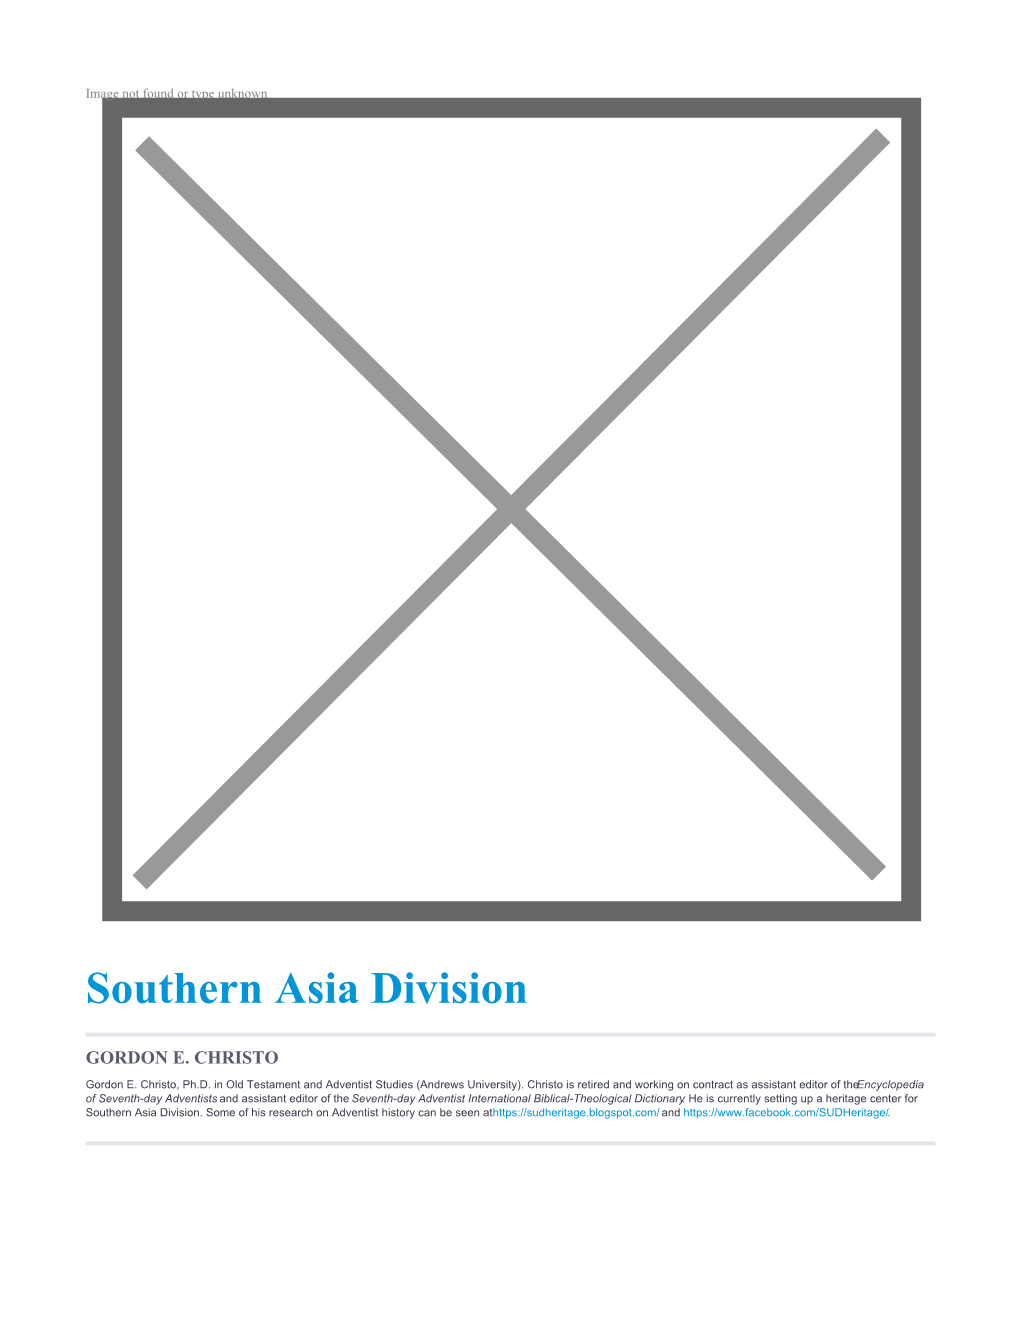 Southern Asia Division